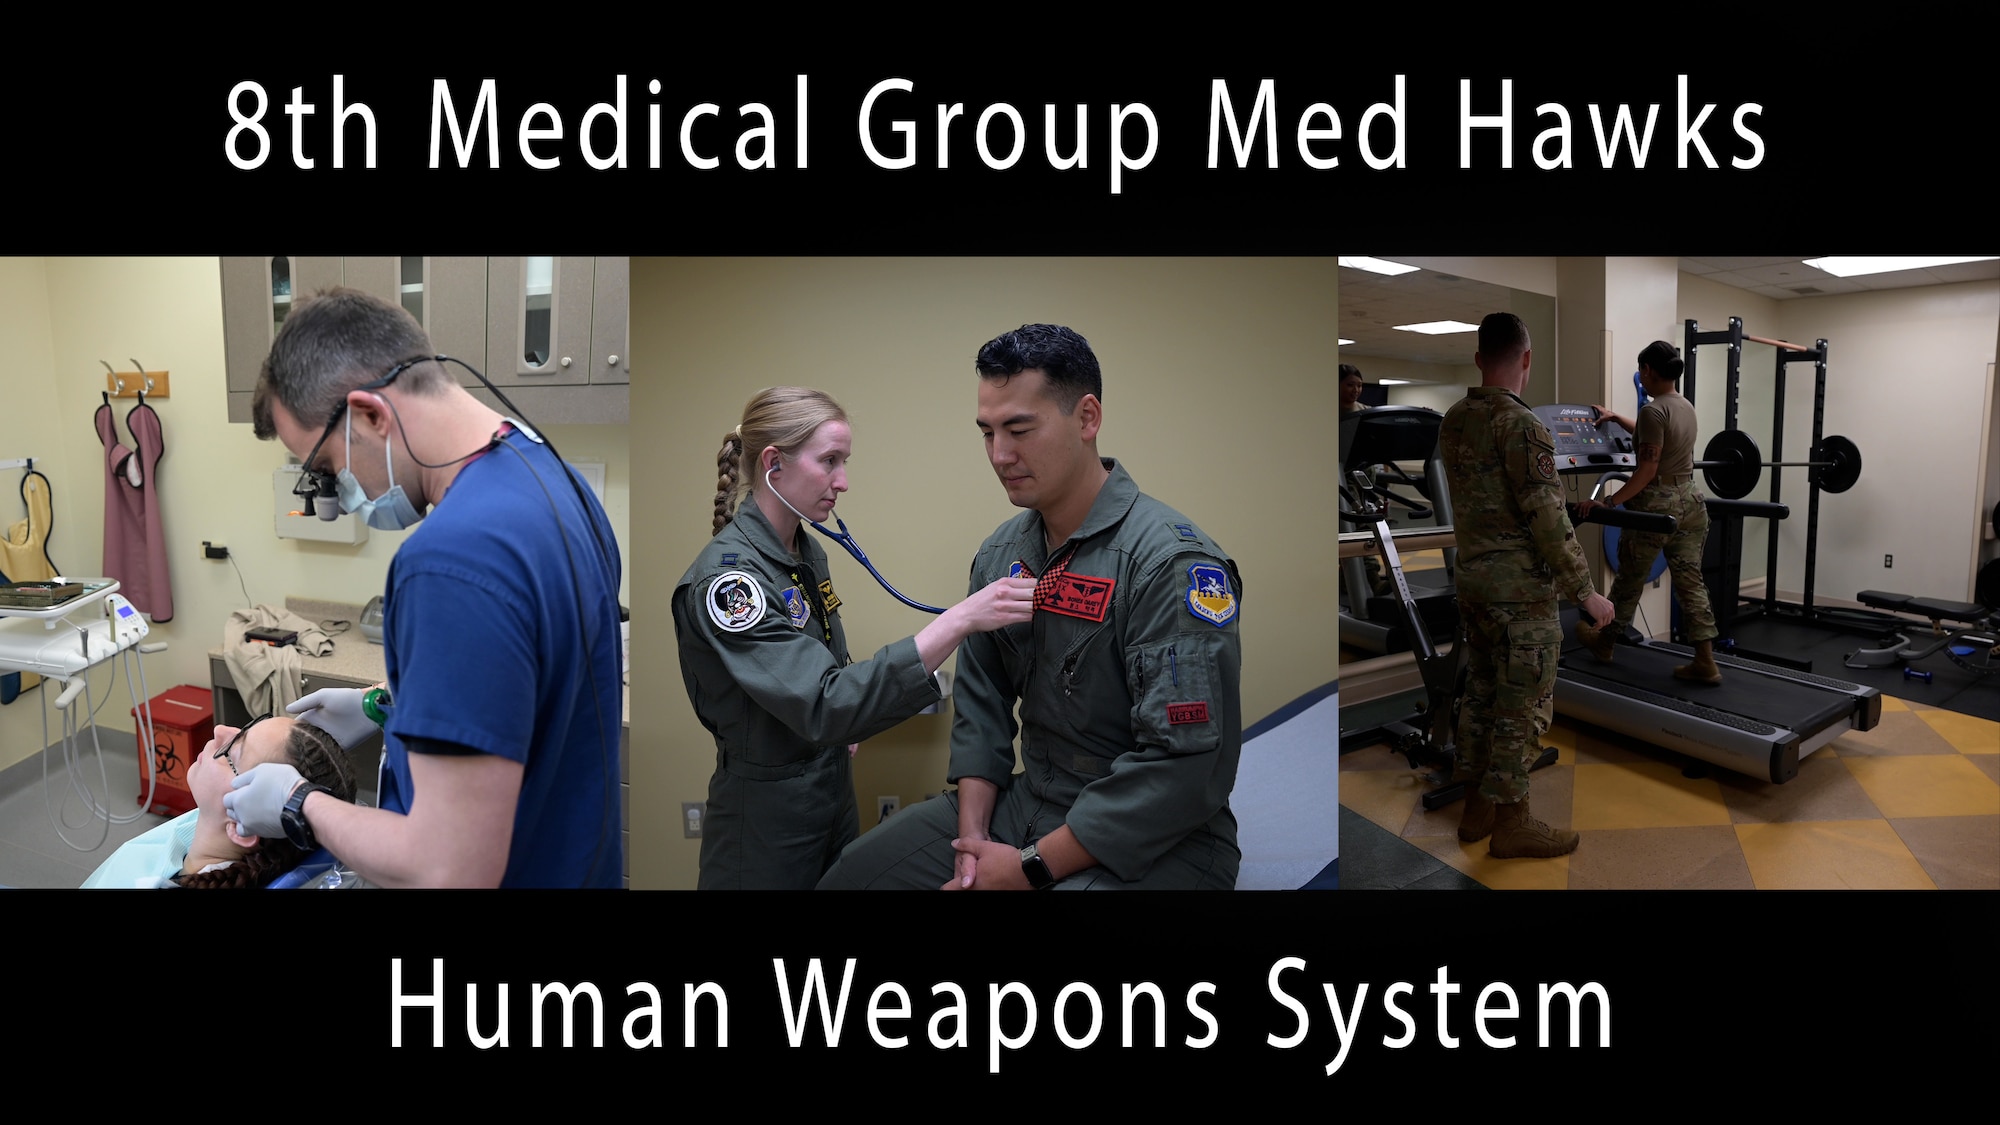 Screen grabs from the human weapons system video showing a Med Hawk dentist, flight doctor and physical therapist. (U.S. Air Force graphic by Tech. Sgt. Timothy Dischinat).